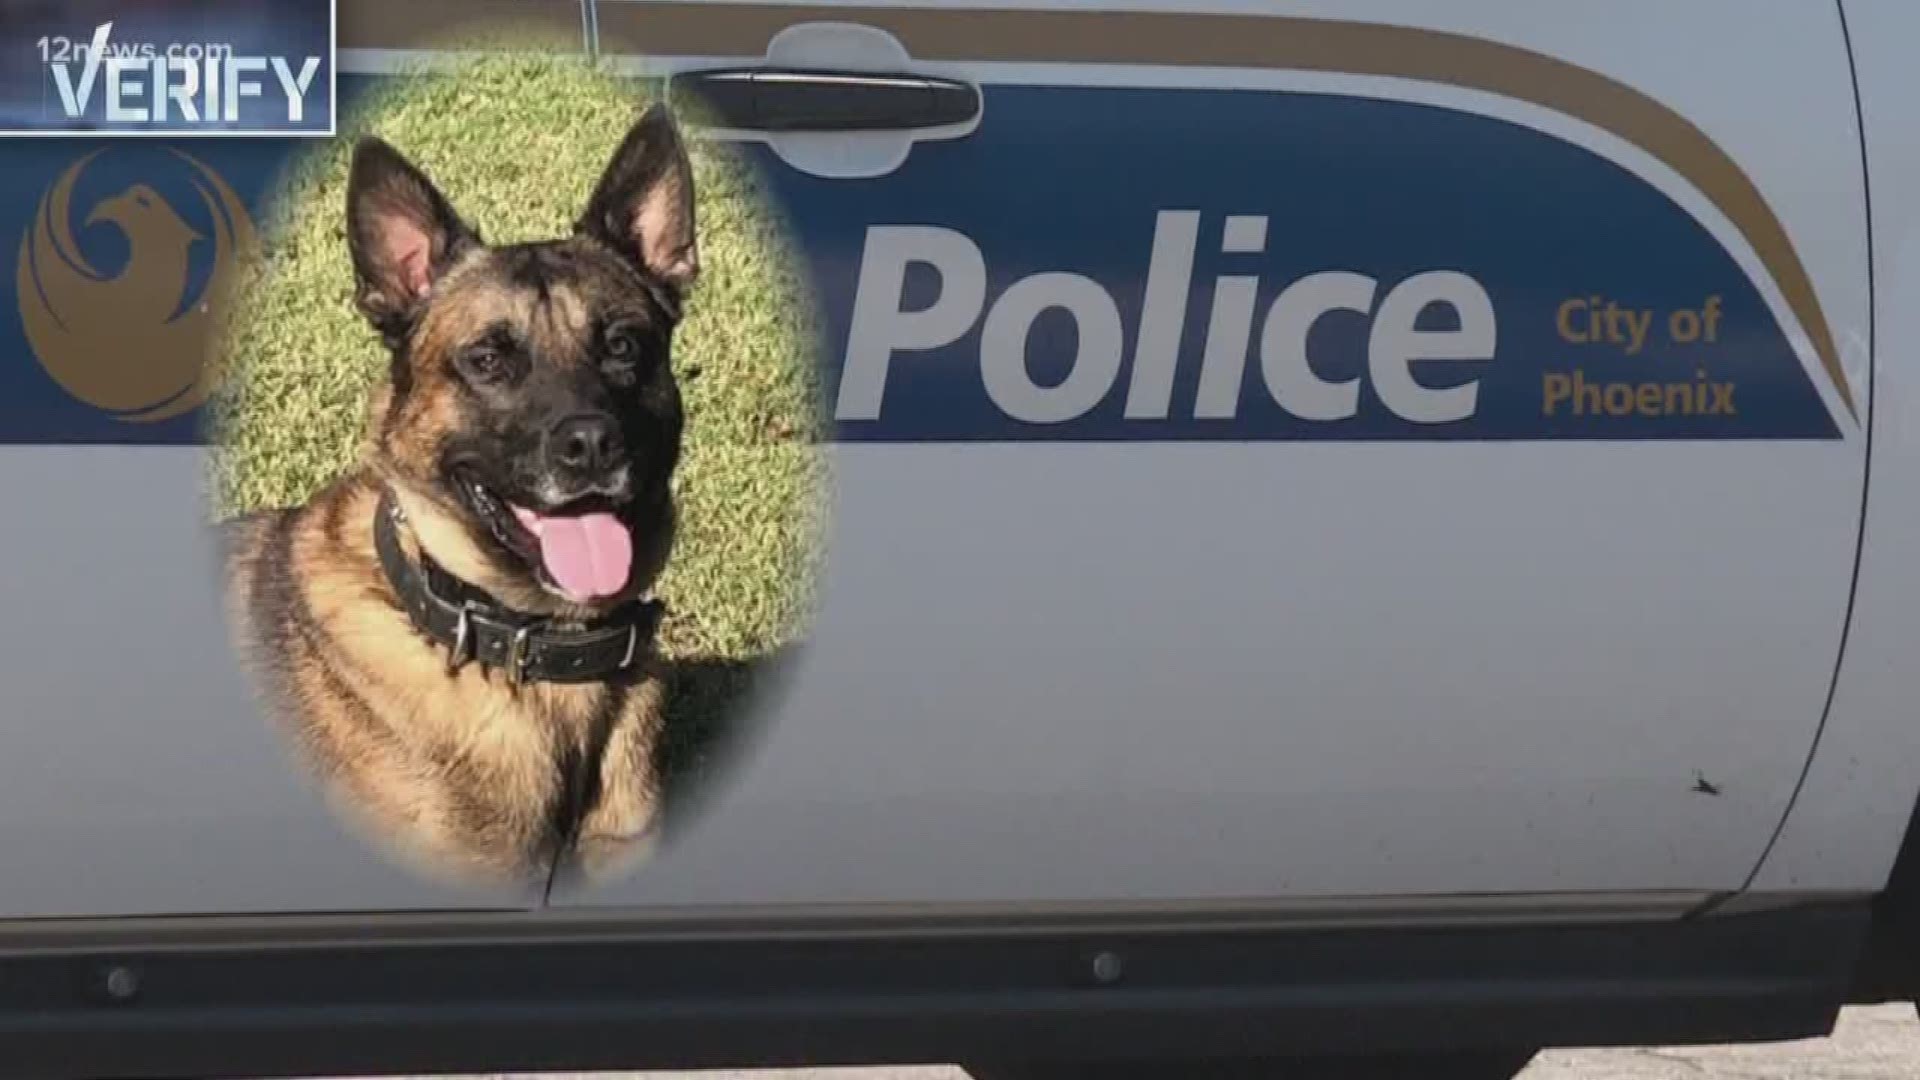 After he was killed in the line of duty during the arrest of a suspect, Phoenix police K9 Bane received a procession fit for a fallen human officer. We certainly consider dogs as part of the family, but does the law treat K9s like human officers?